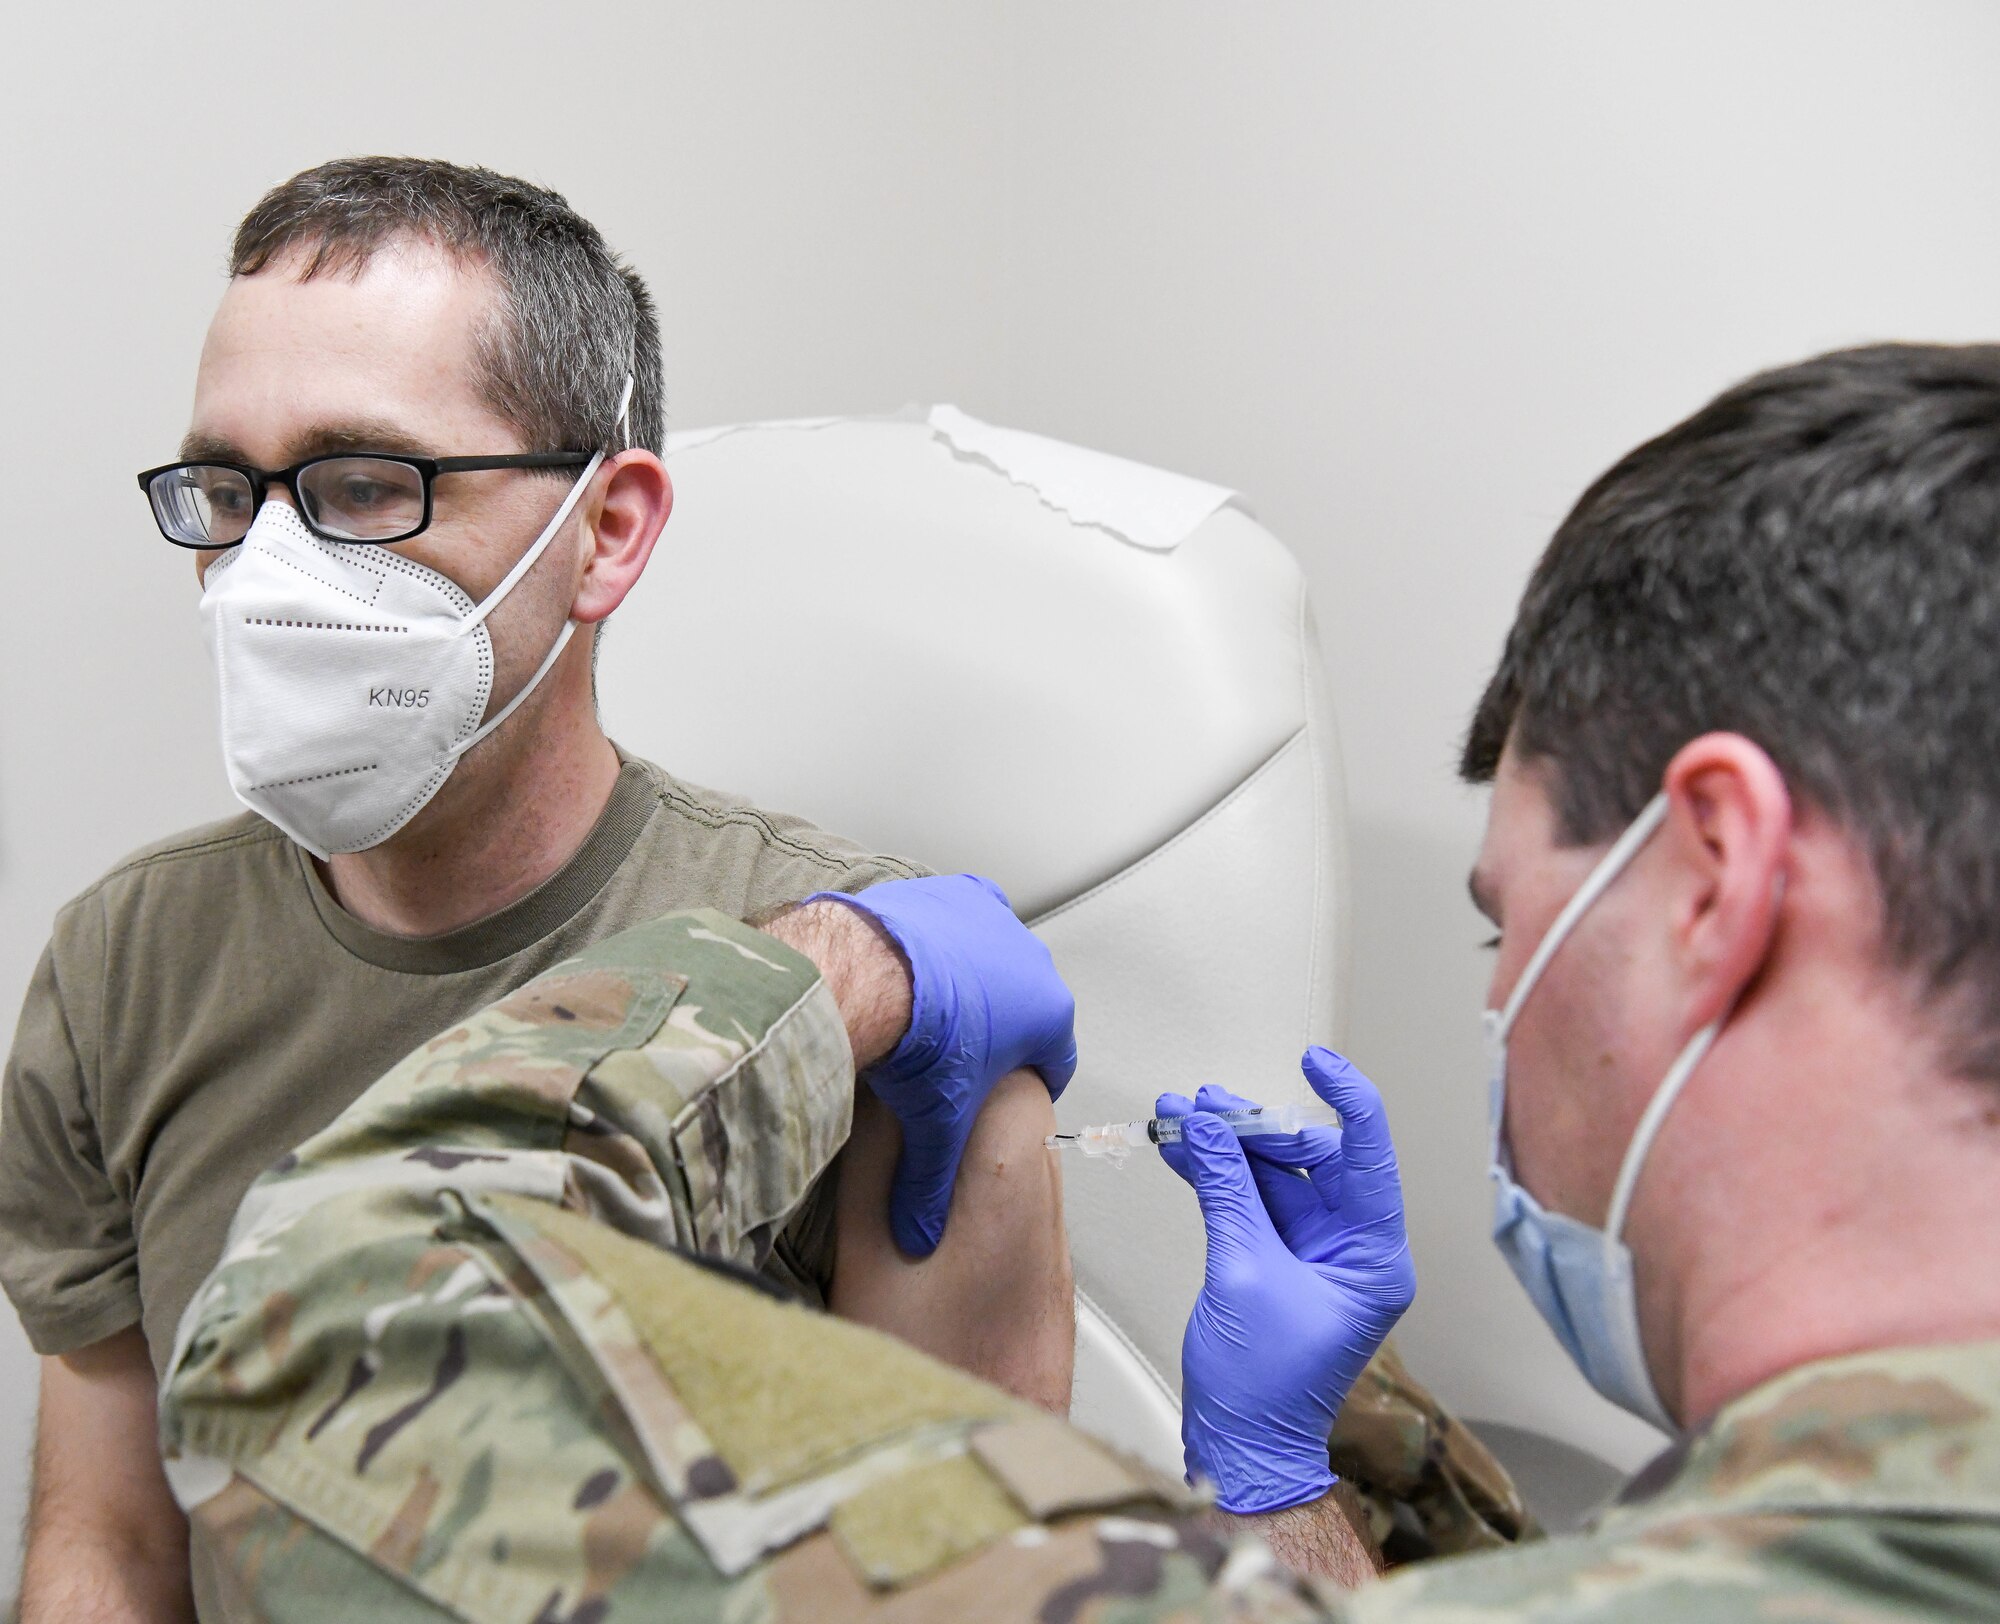 Sgt. Dillon Henderson with the Tennessee Army National Guard administers a COVID-19 vaccine to Maj. Wesly Anderson, an Arnold Engineering Development Complex team member, at Arnold Air Force Base, Tenn., Feb. 23, 2021, at the Medical Aid Station on base. (U.S. Air Force photo by Jill Pickett)